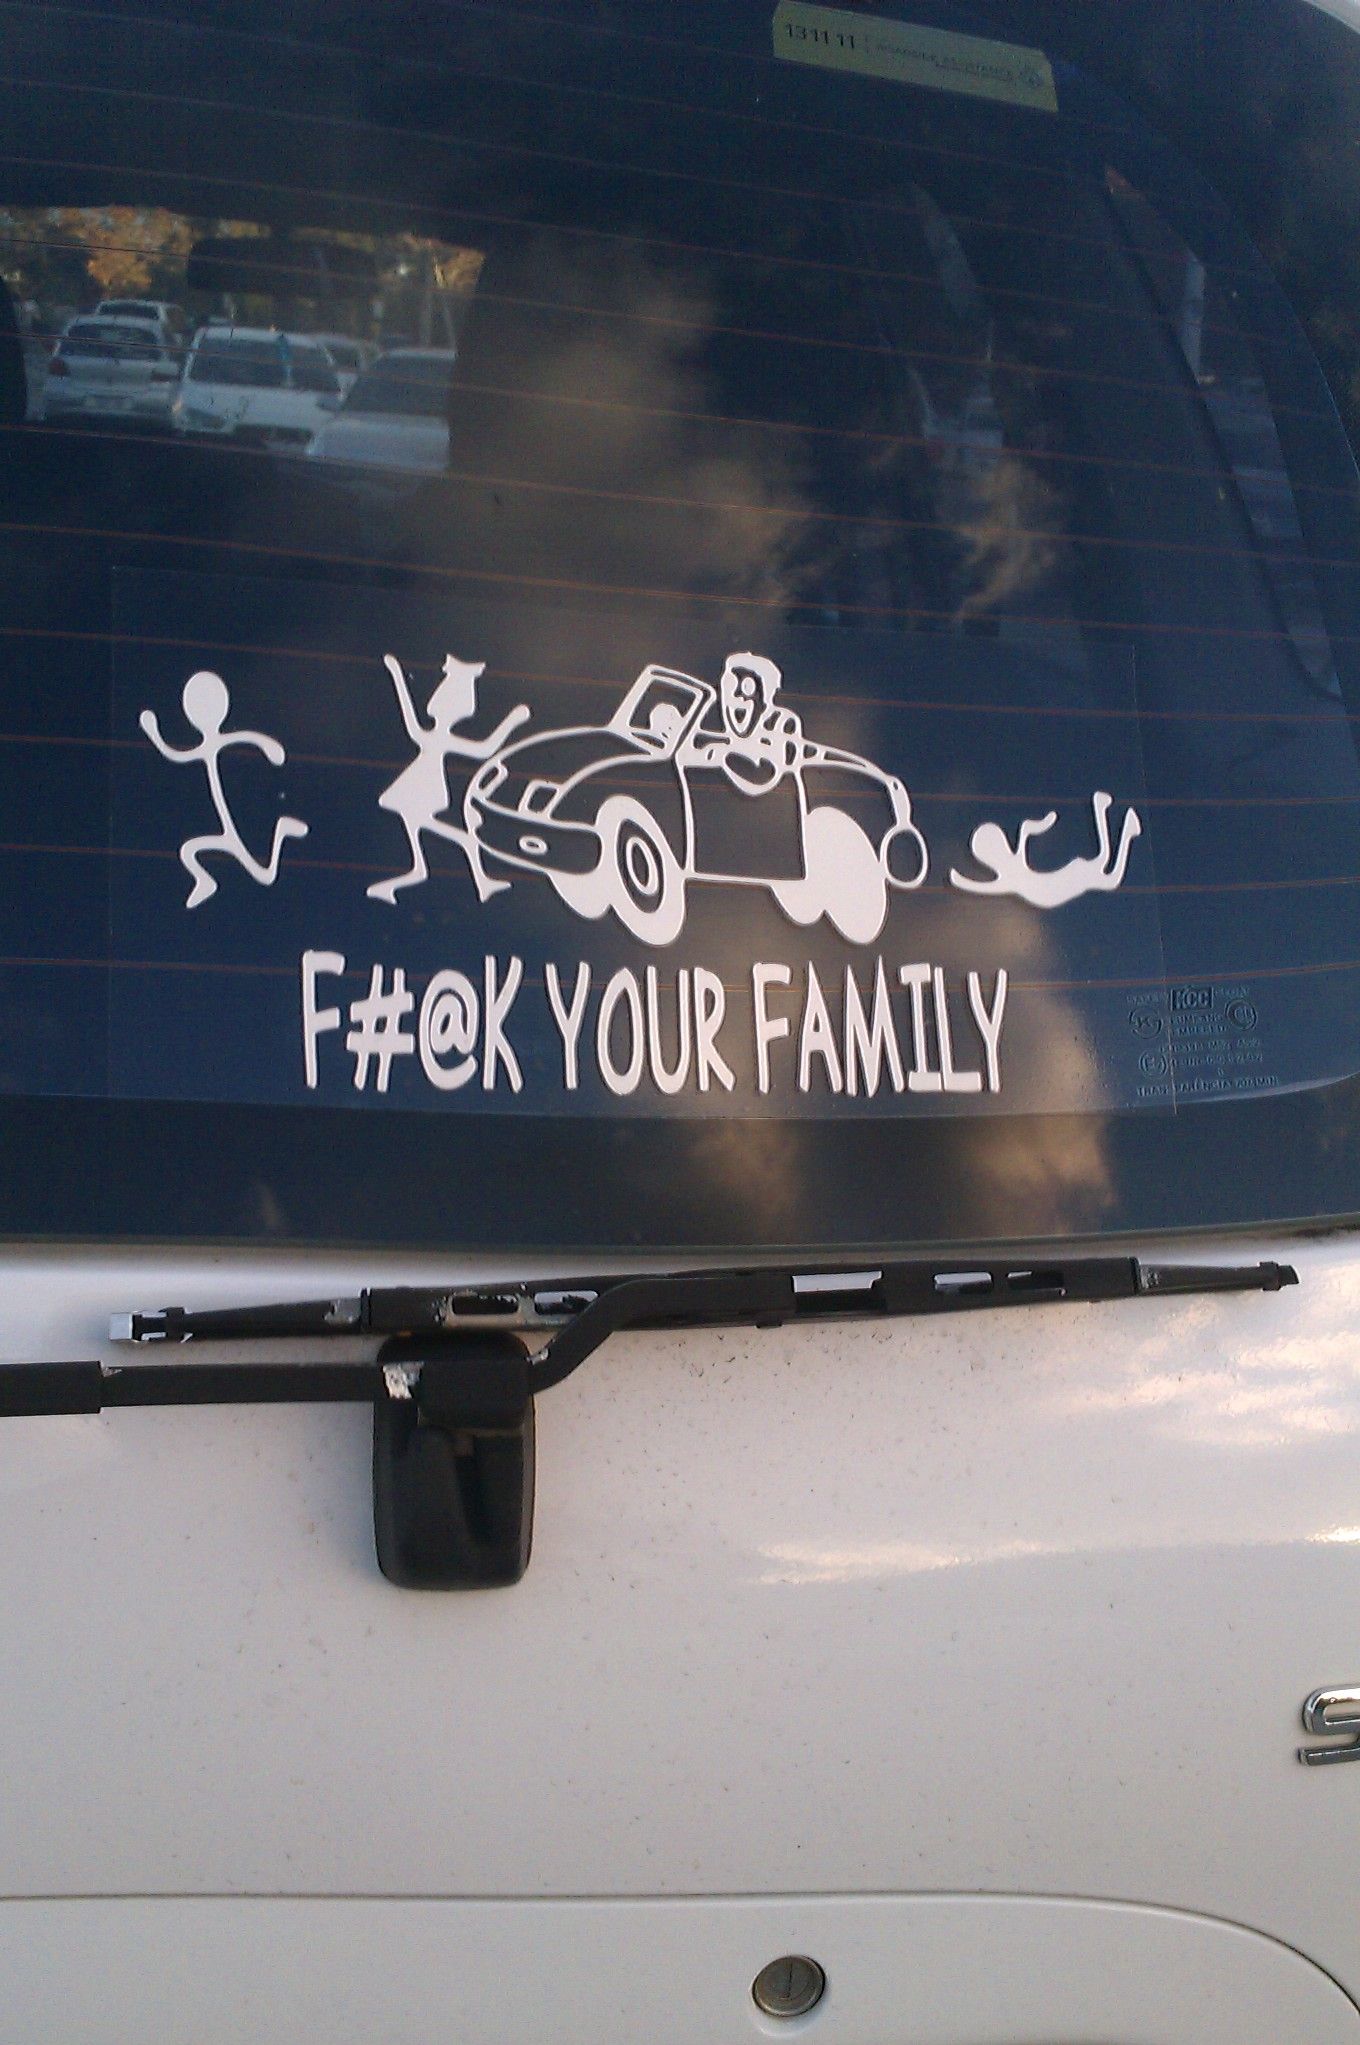 Well f!%k you too | image tagged in funny,bumper sticker